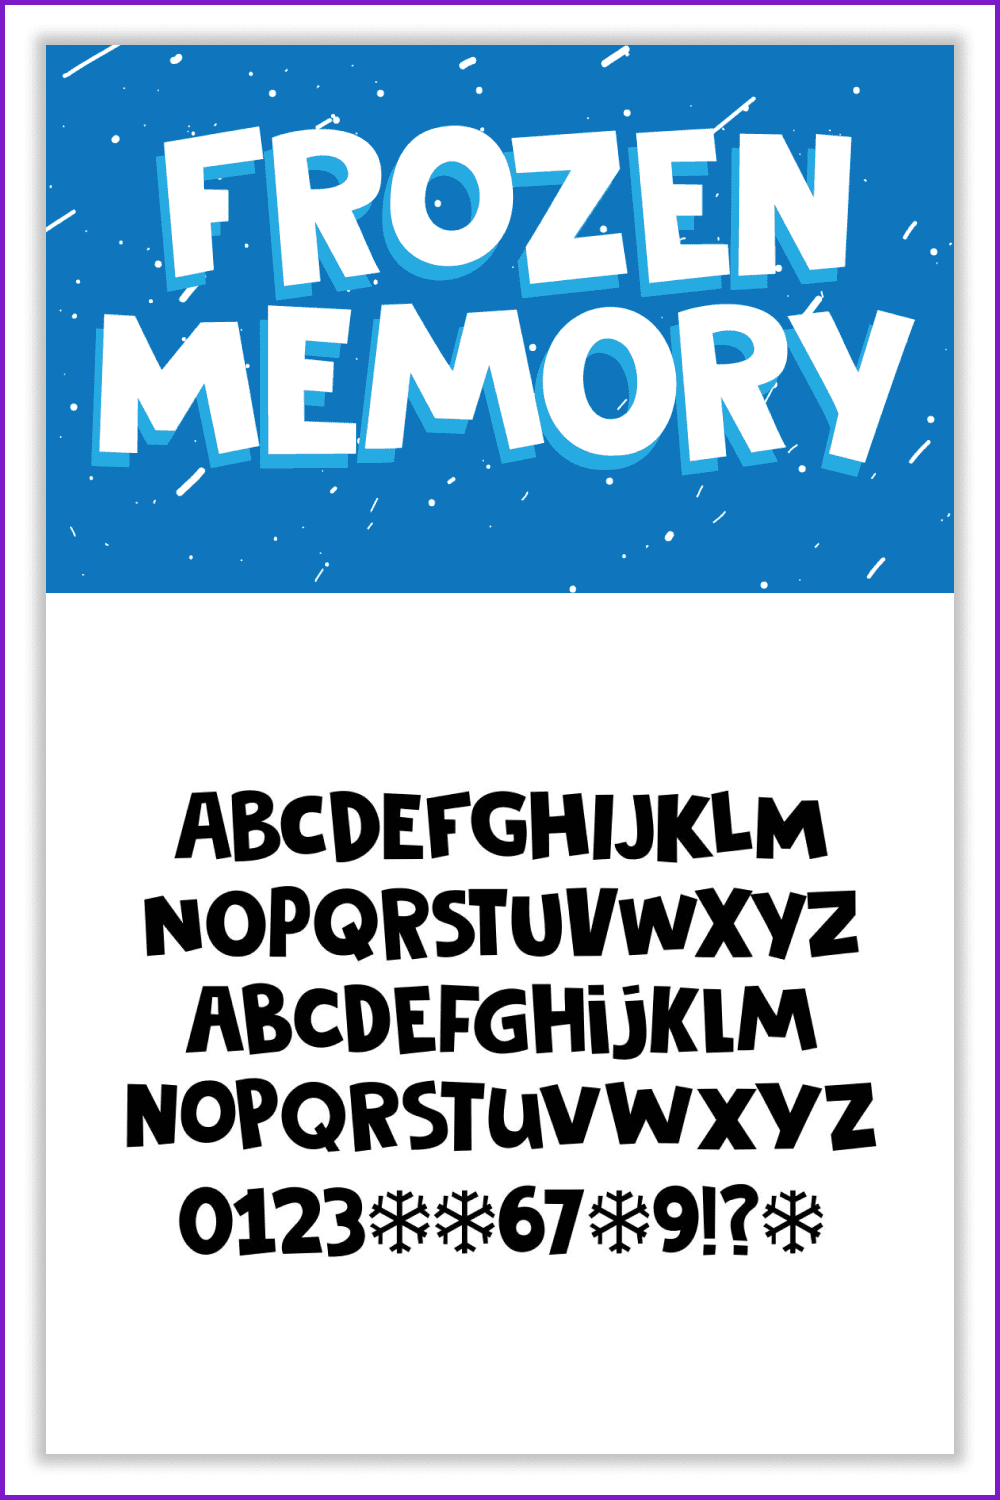 Collage of text in cartoon style on blue and white background.